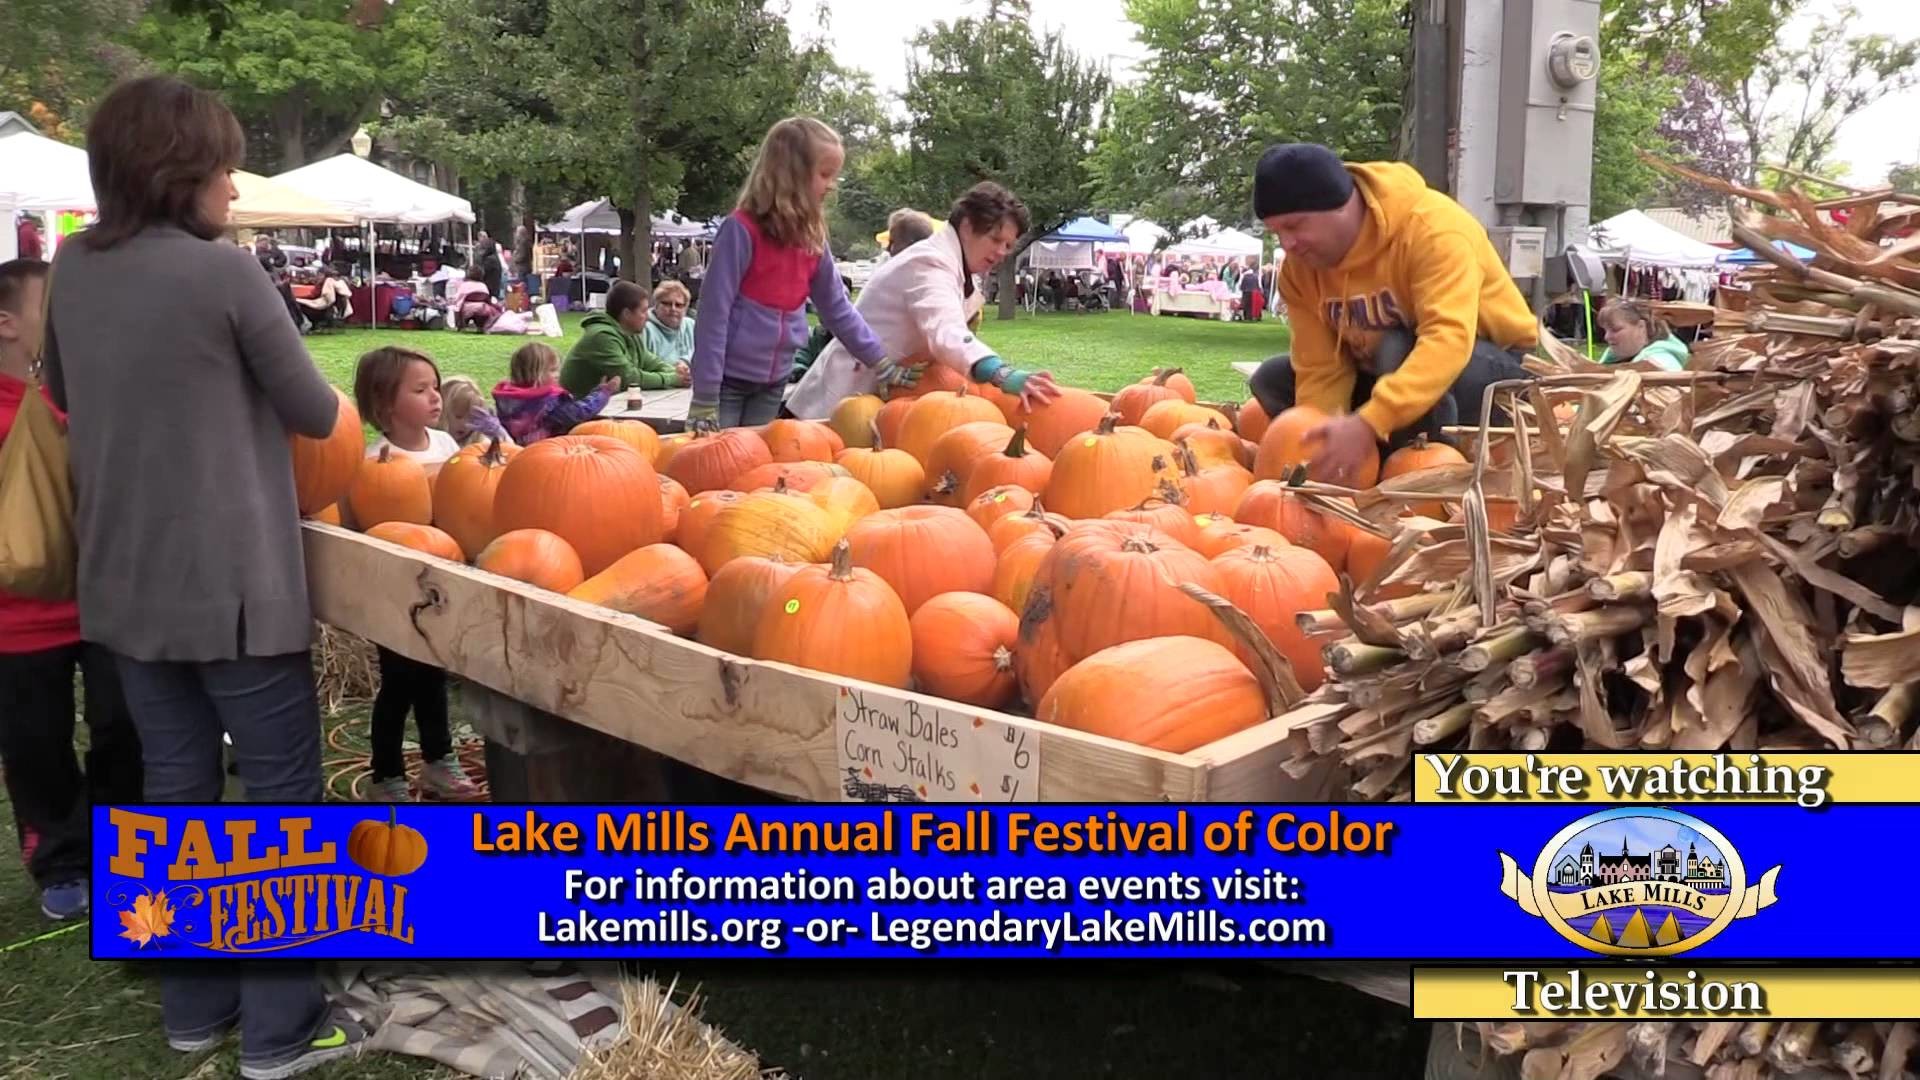 1920x1080 Lake Mills Fall Festival of Color